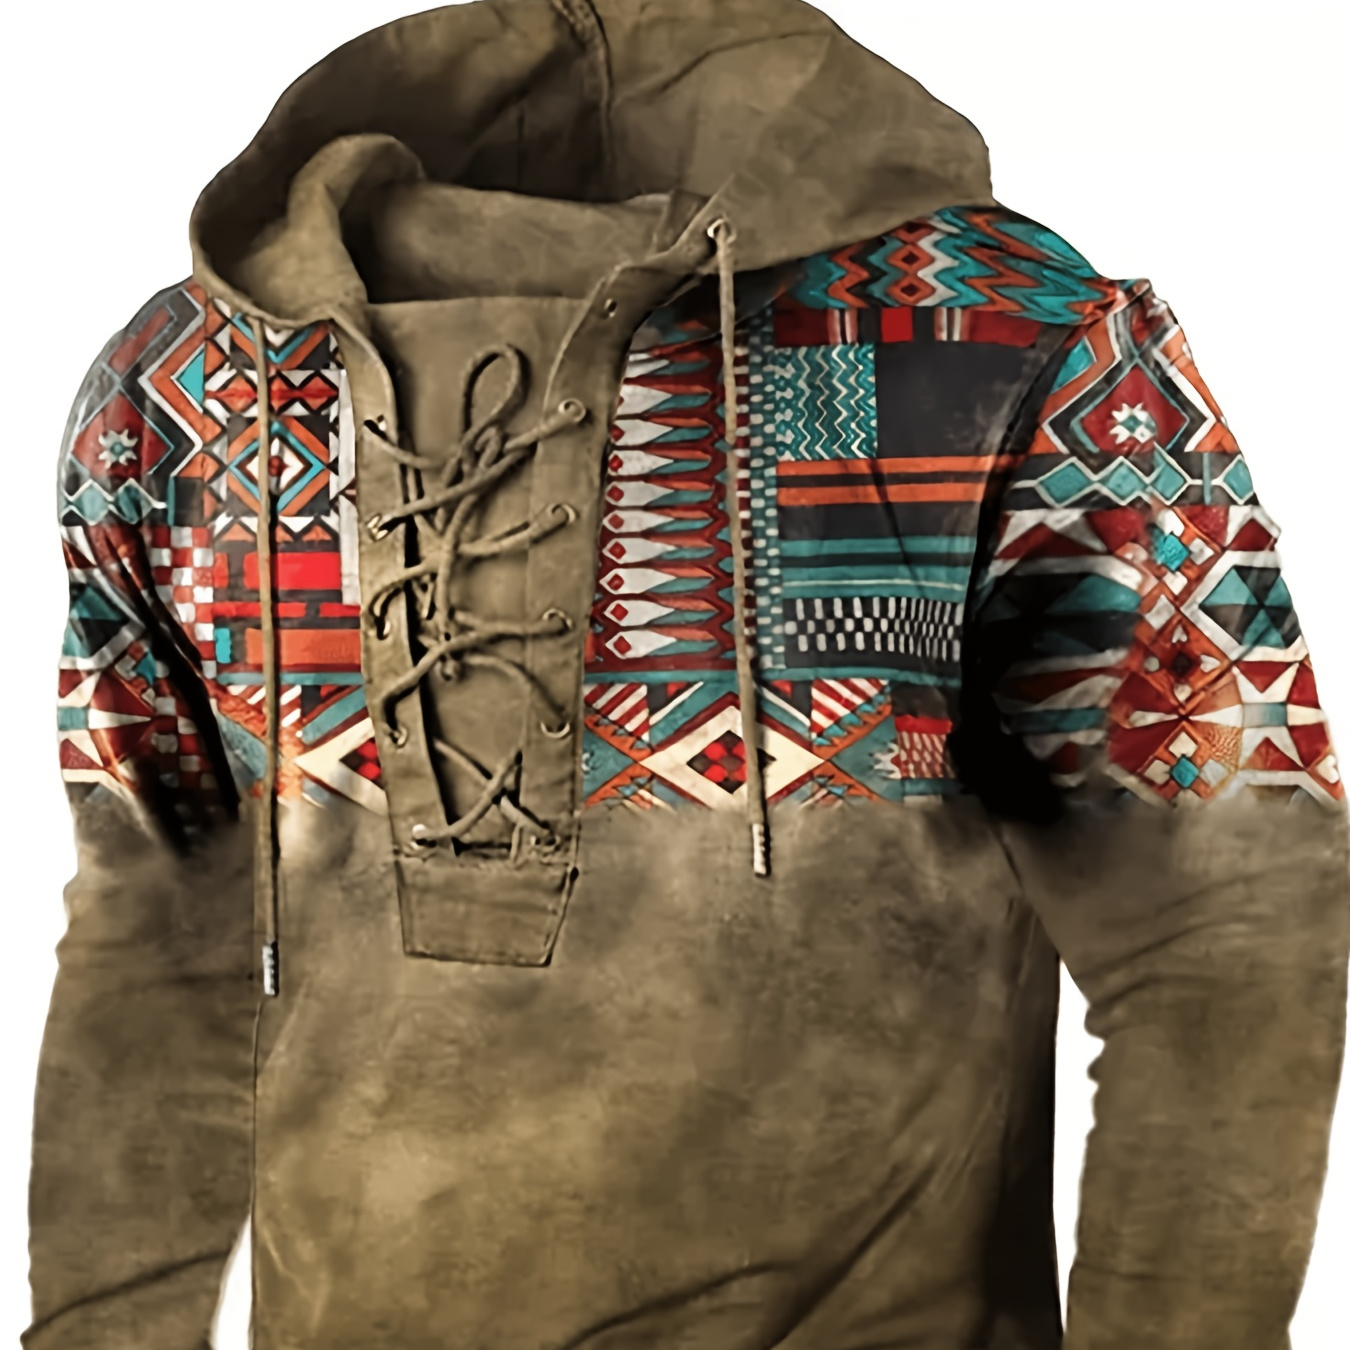 

Retro Ethnic Pattern Print Hoodie, Cool Lace Up Hoodies For Men, Men's Casual Graphic Design Hooded Sweatshirt Streetwear For Winter Fall, As Gifts